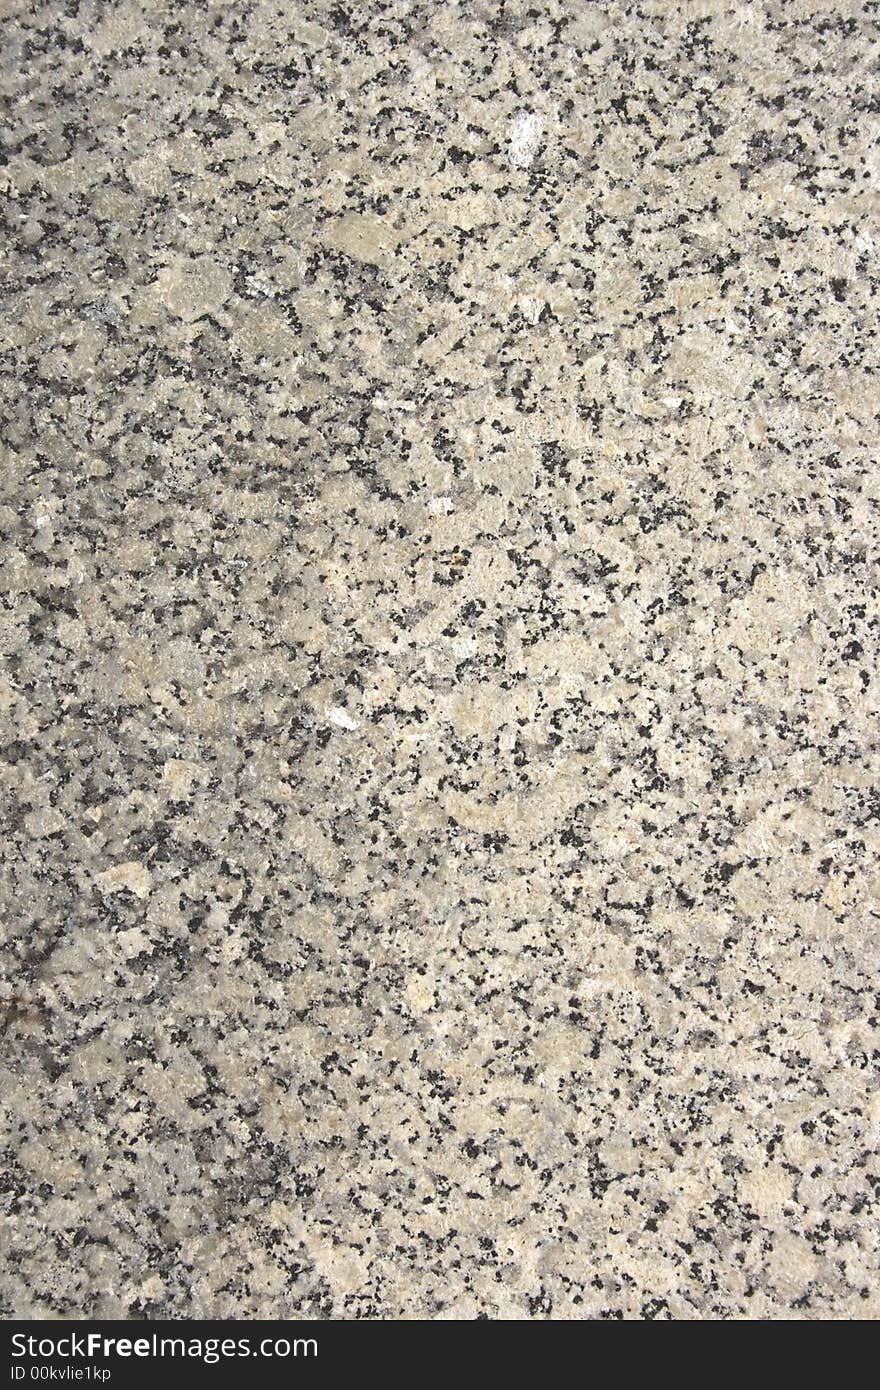 Grey natural marble texture or background can use in design. Grey natural marble texture or background can use in design.